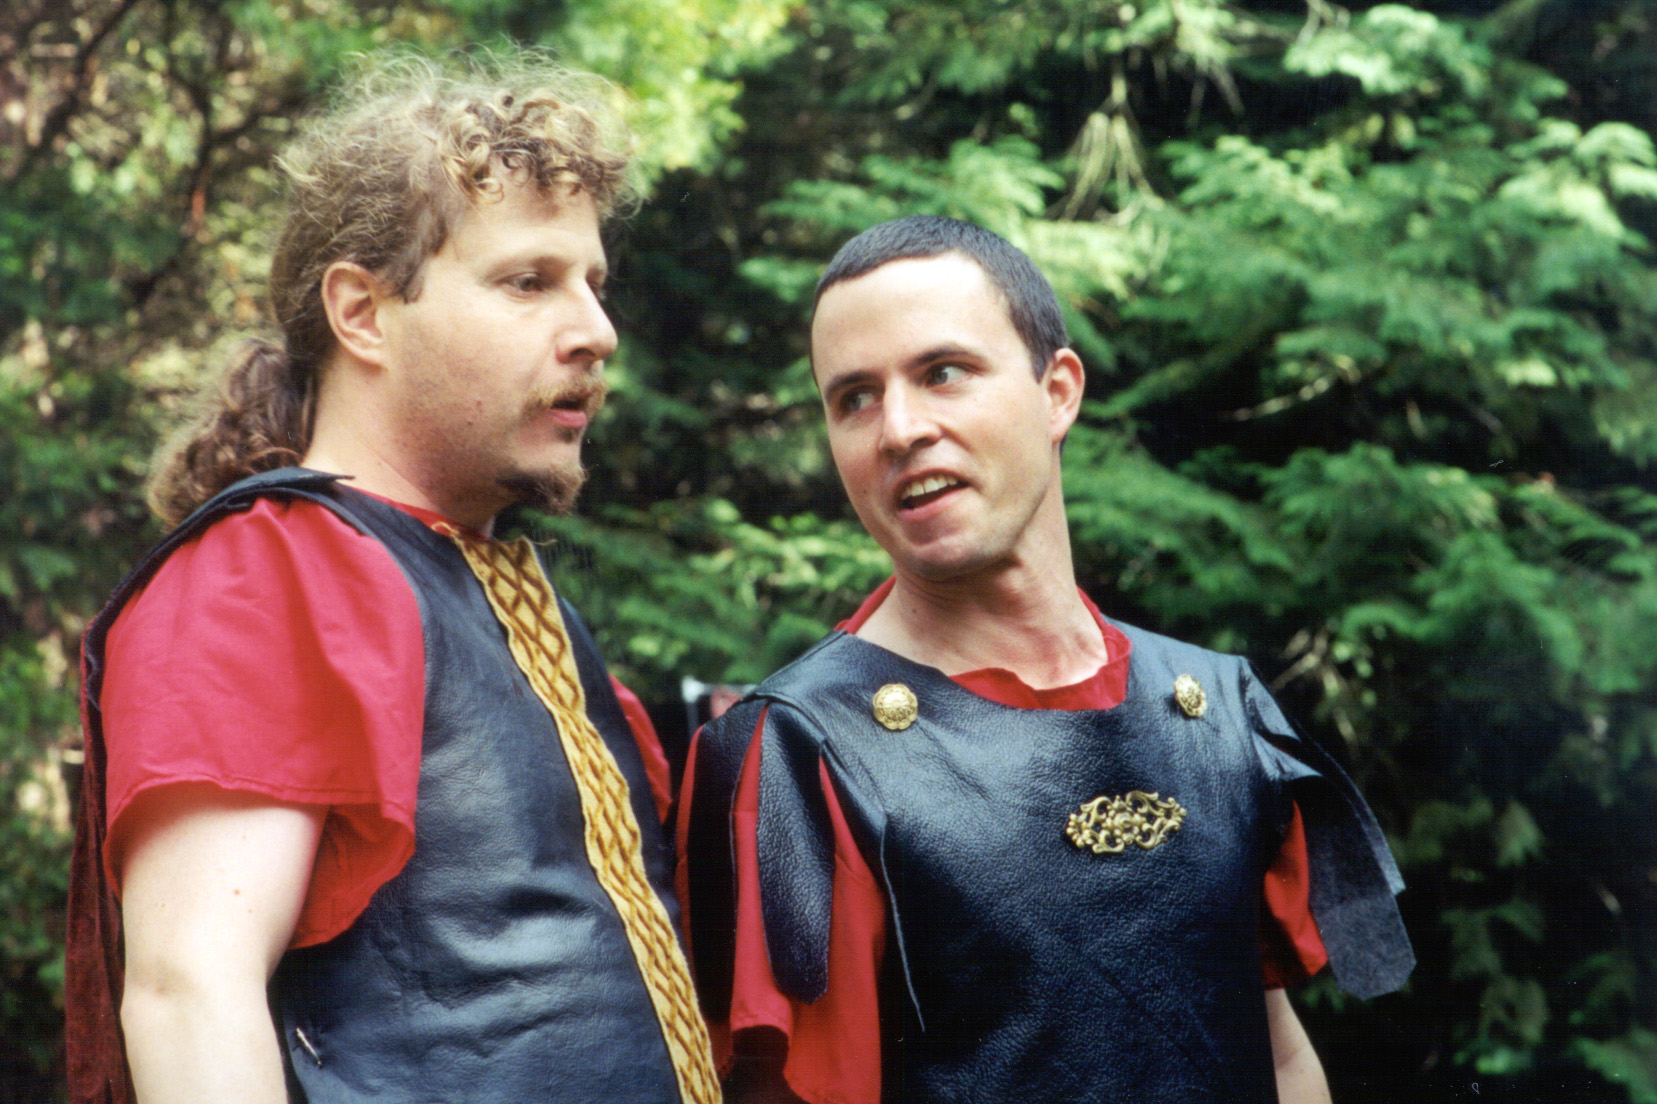 David James Dodge and Jason Marr in Troilus and Cressida